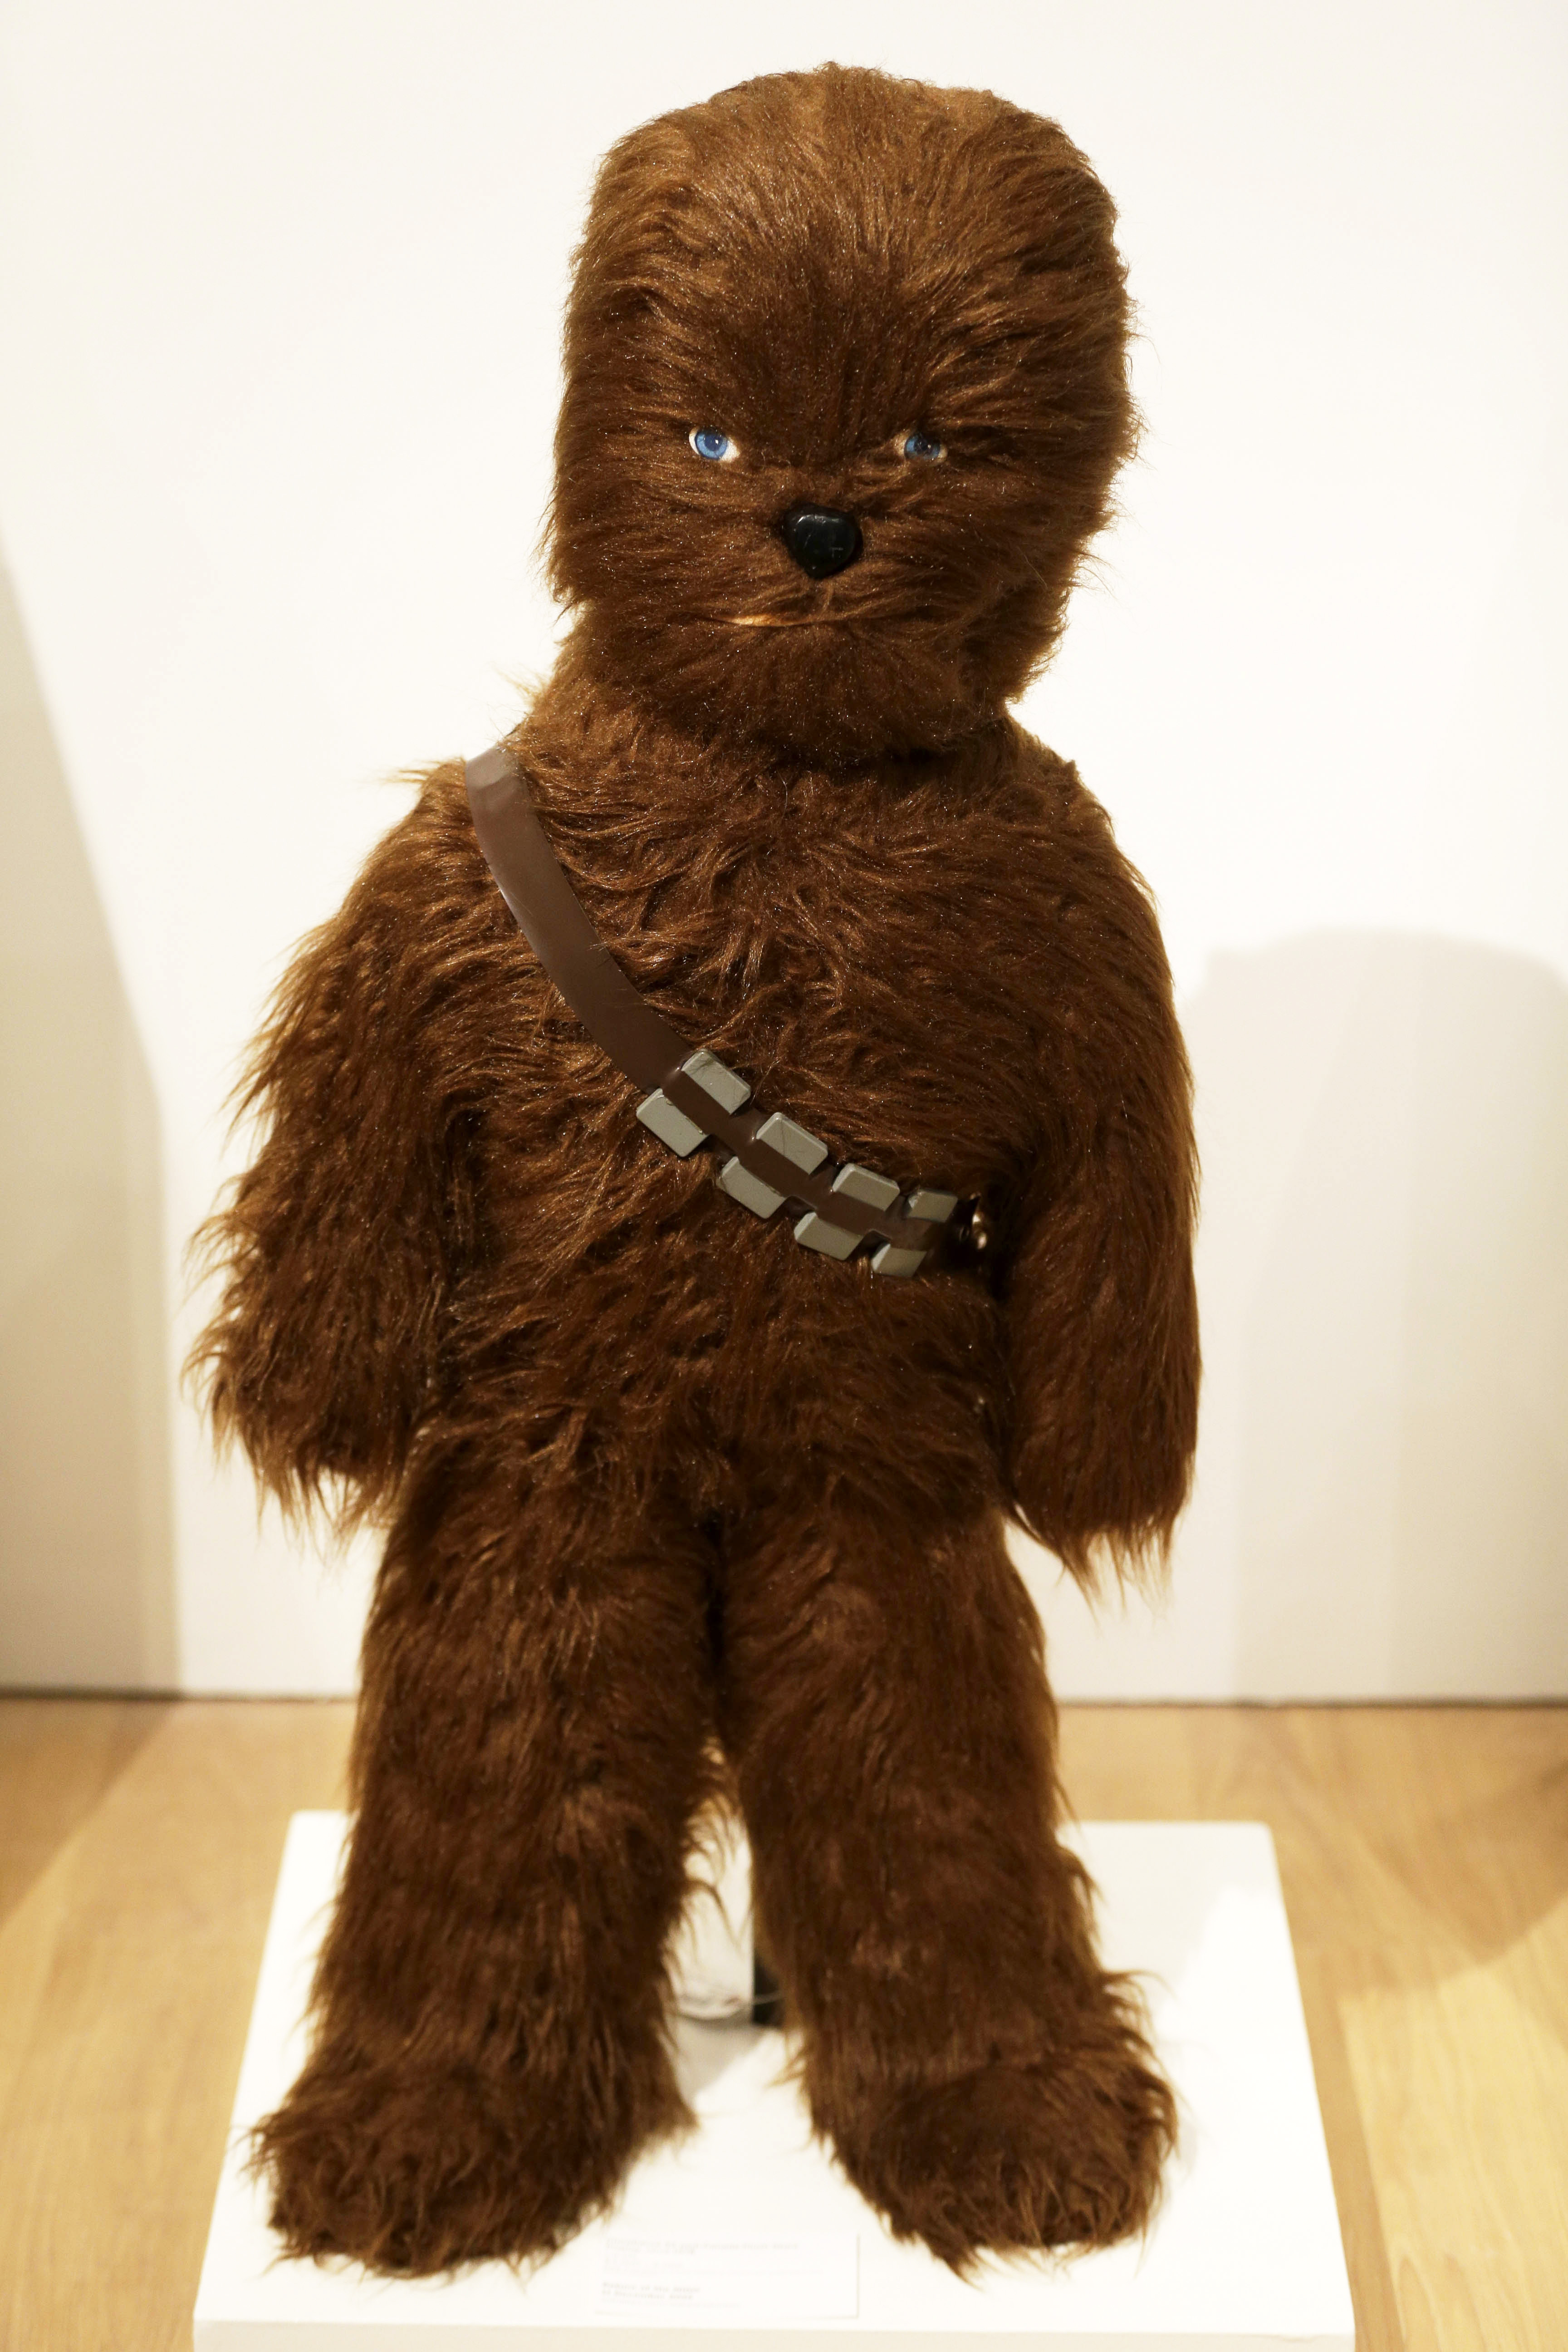 A plush Chewbacca doll is displayed at Sotheby's in New York City on Dec. 2, 2015.